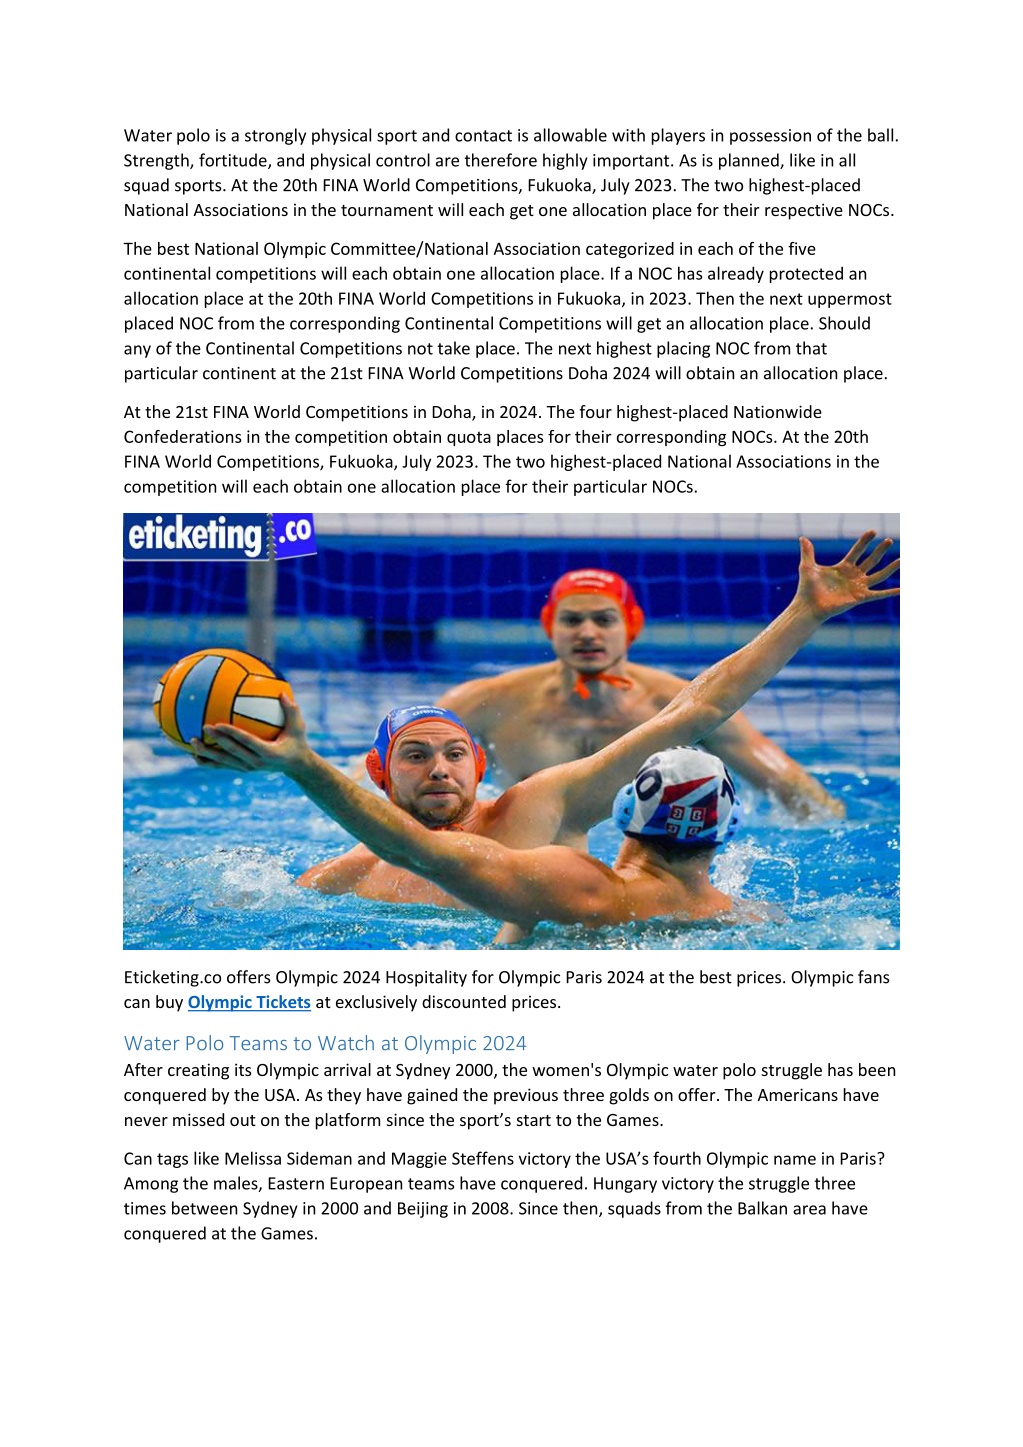 PPT Olympic 2024 Water Polo Canada National Team to start their road